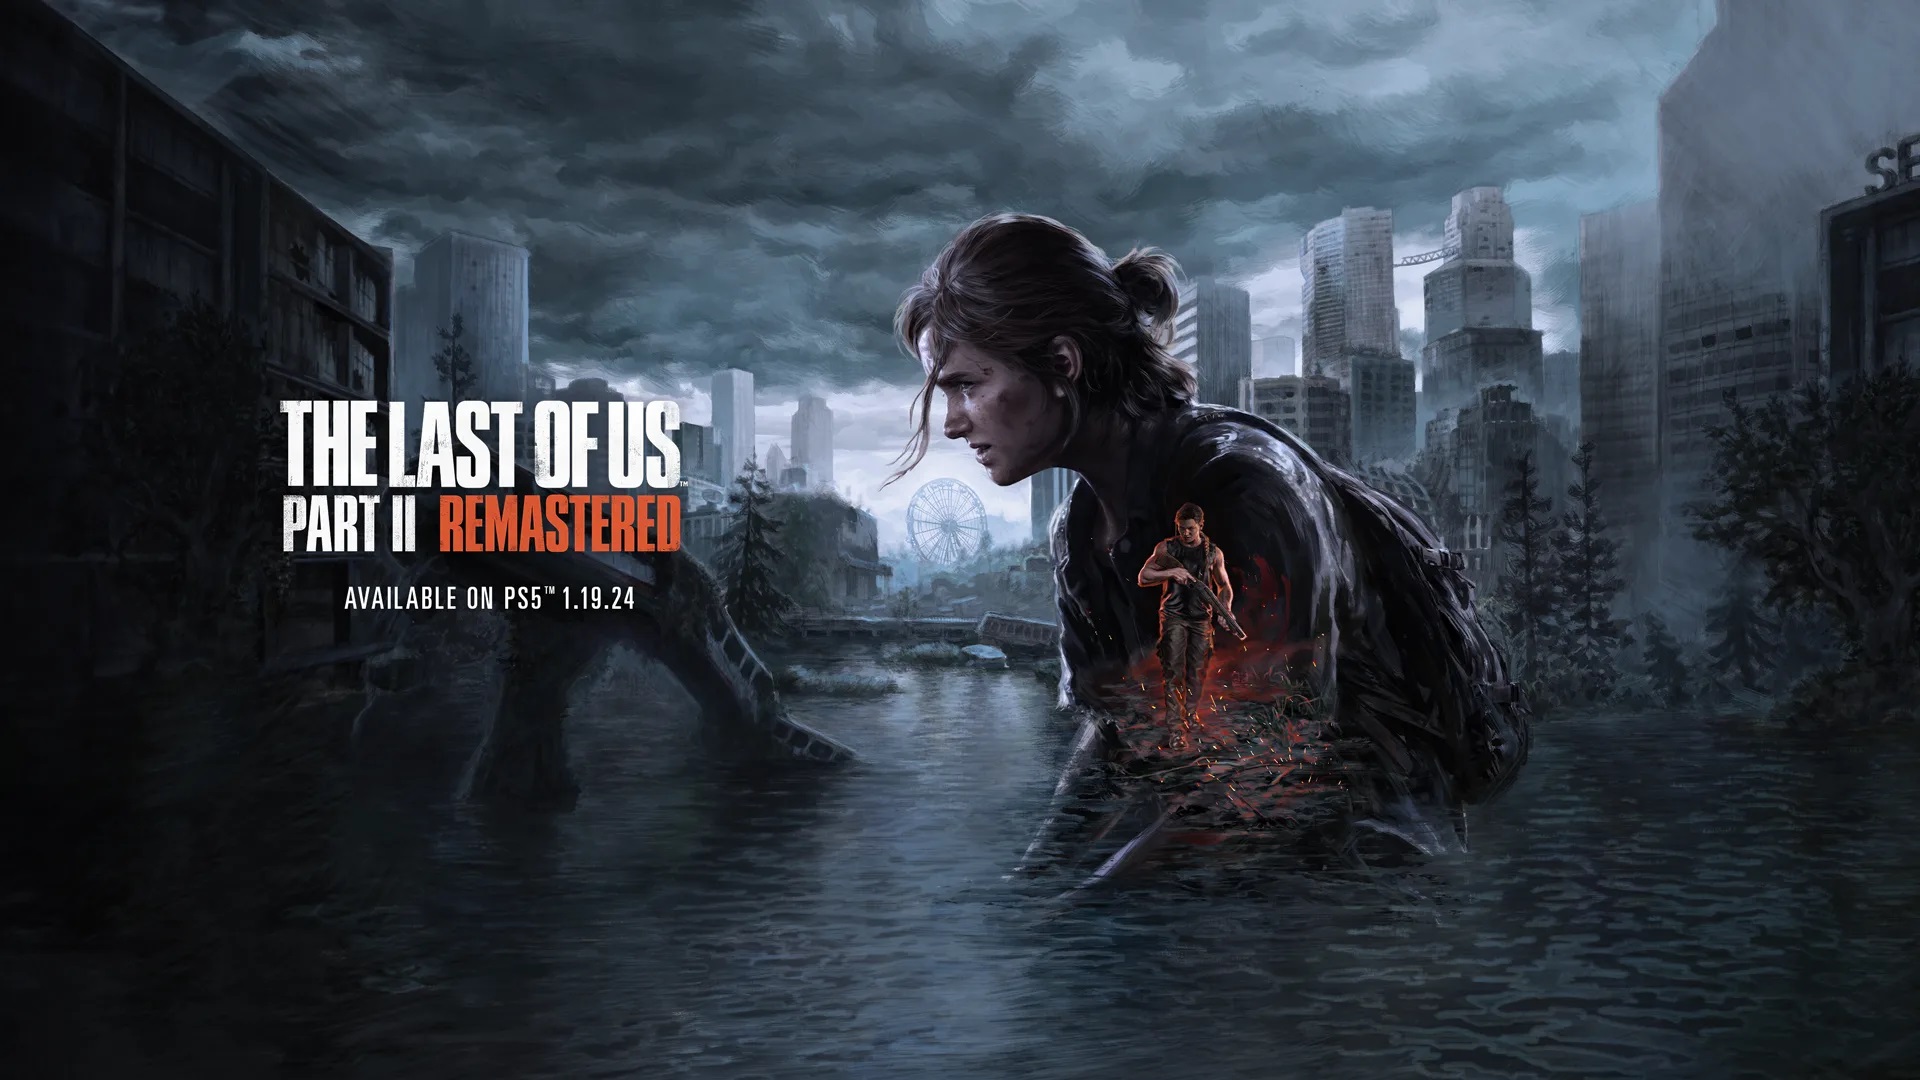 The Last of Us 2 Remastered No Return Roguelike Mode Said to Include At  Least 12 Different Levels